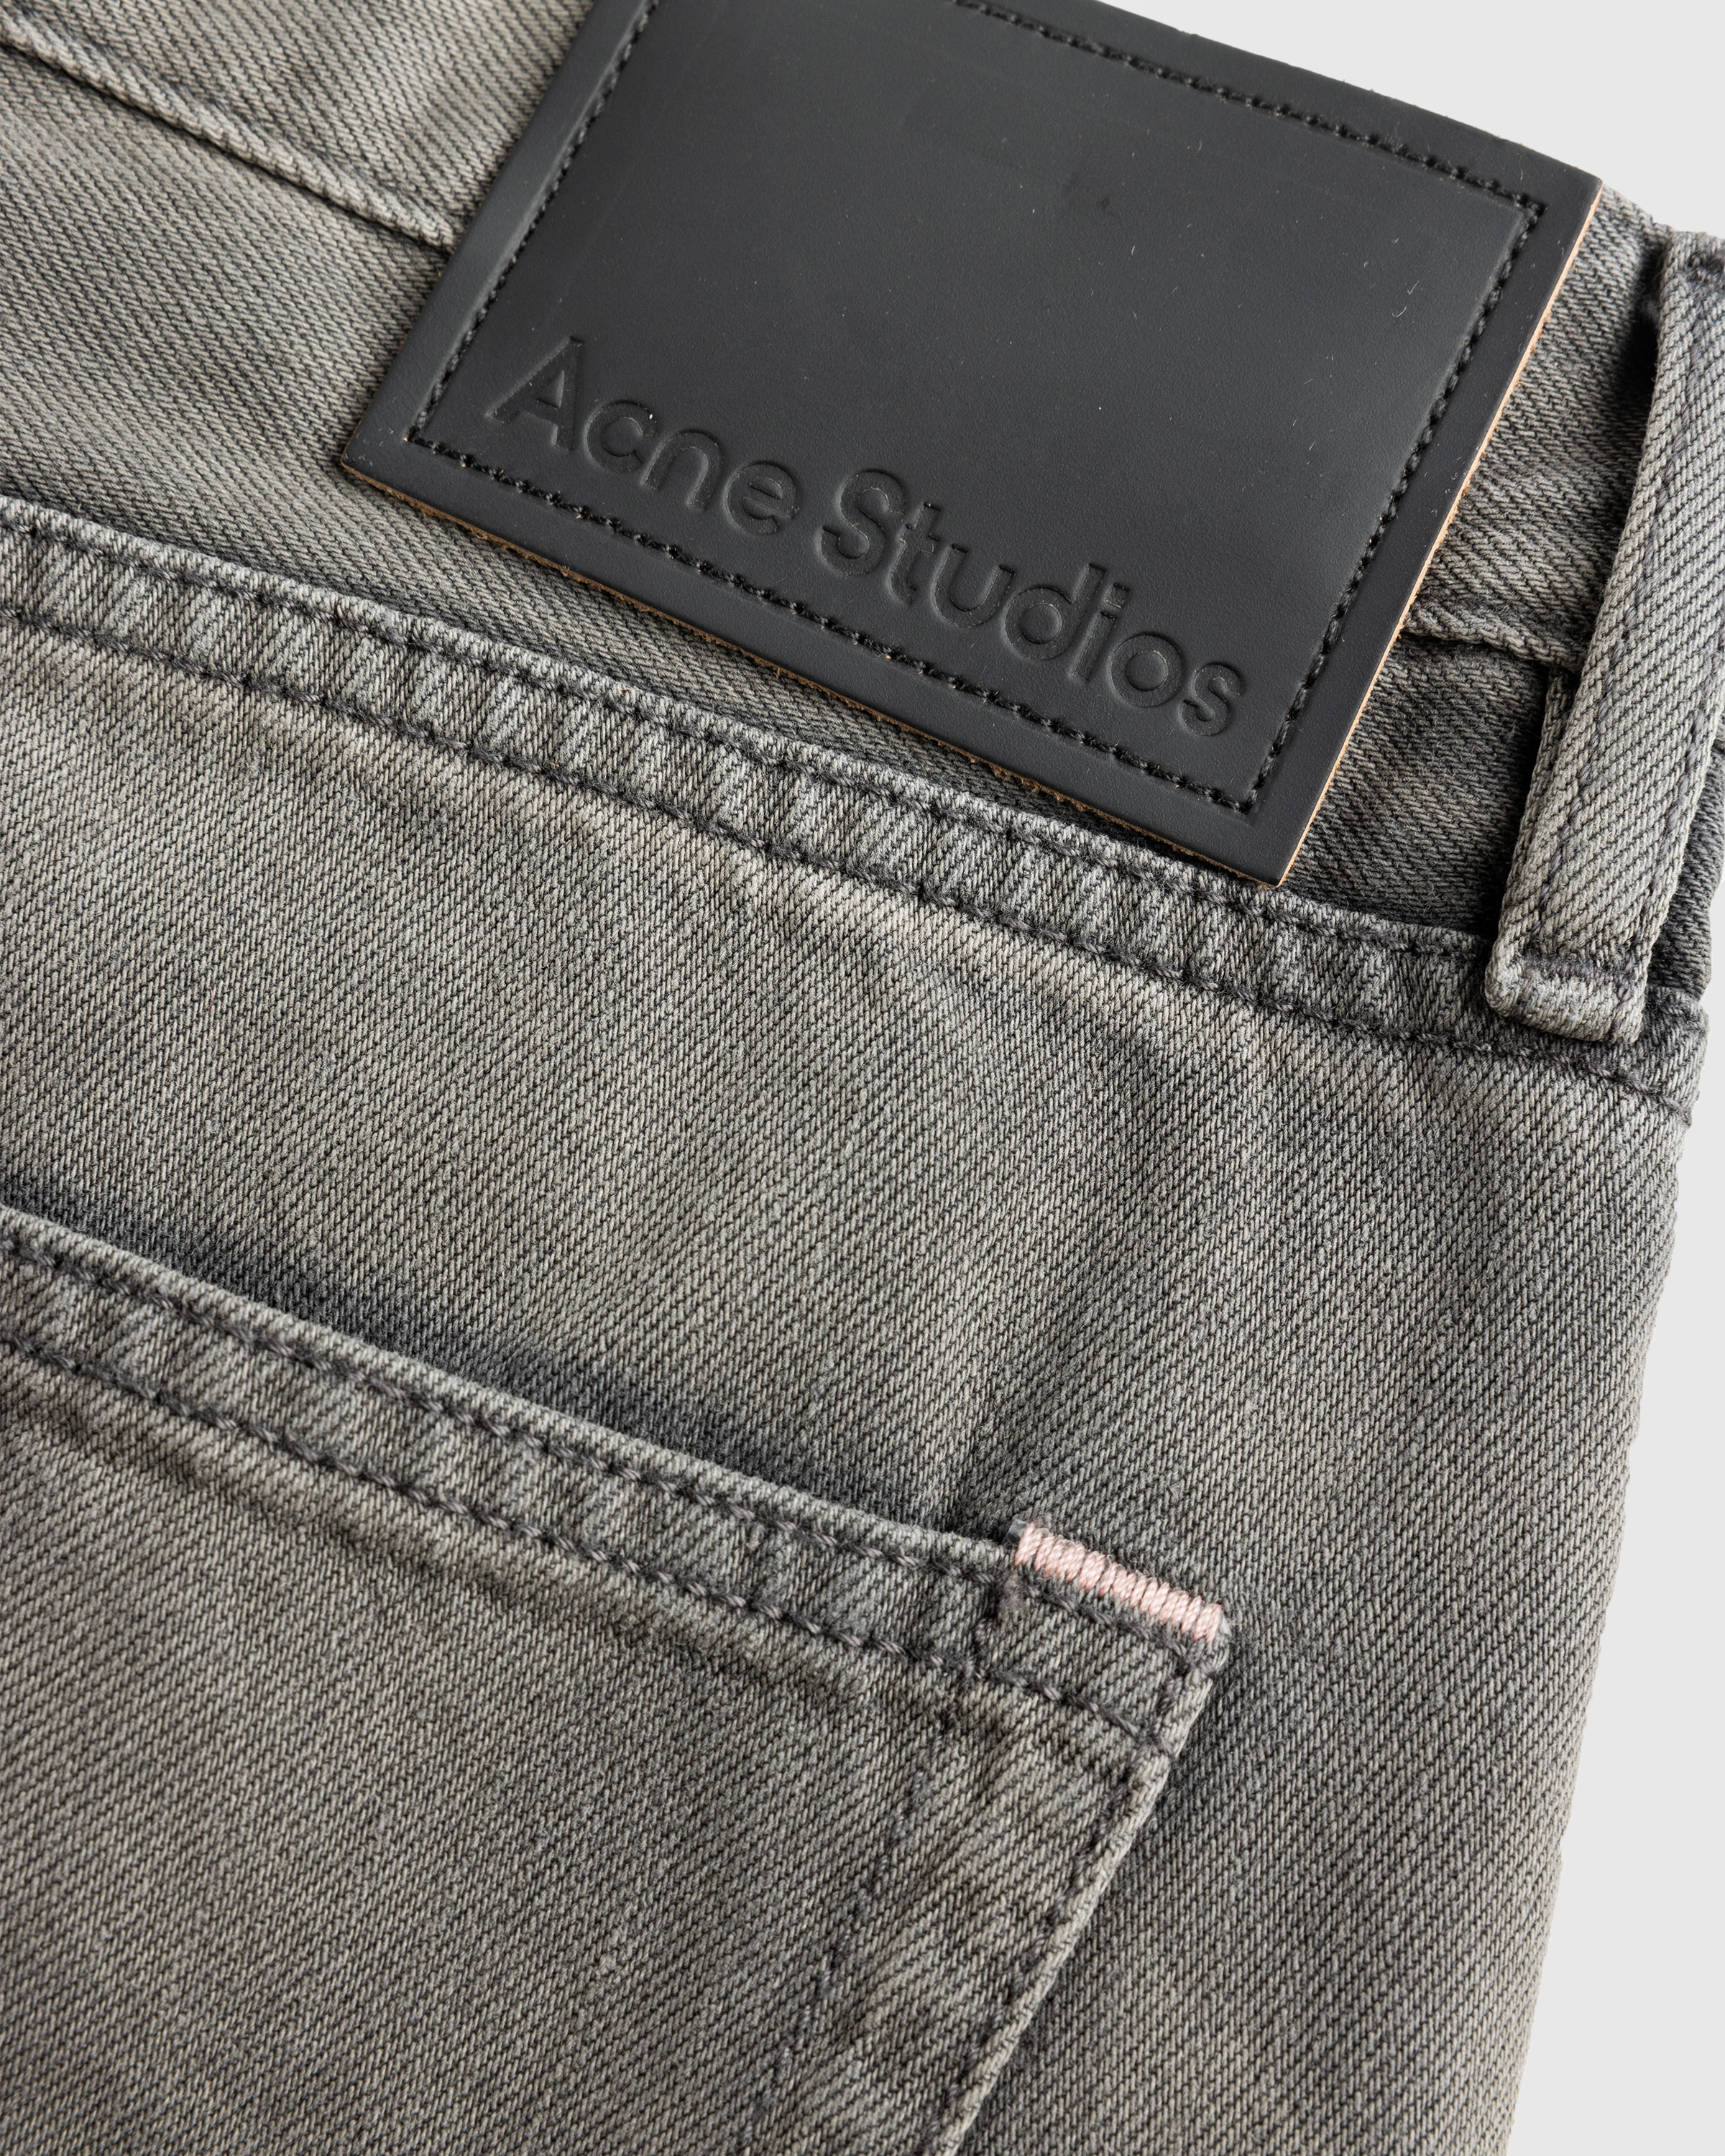 Acne Studios – Loose Fit Jeans 1981M Anthracite Grey - Pants - Grey - Image 7